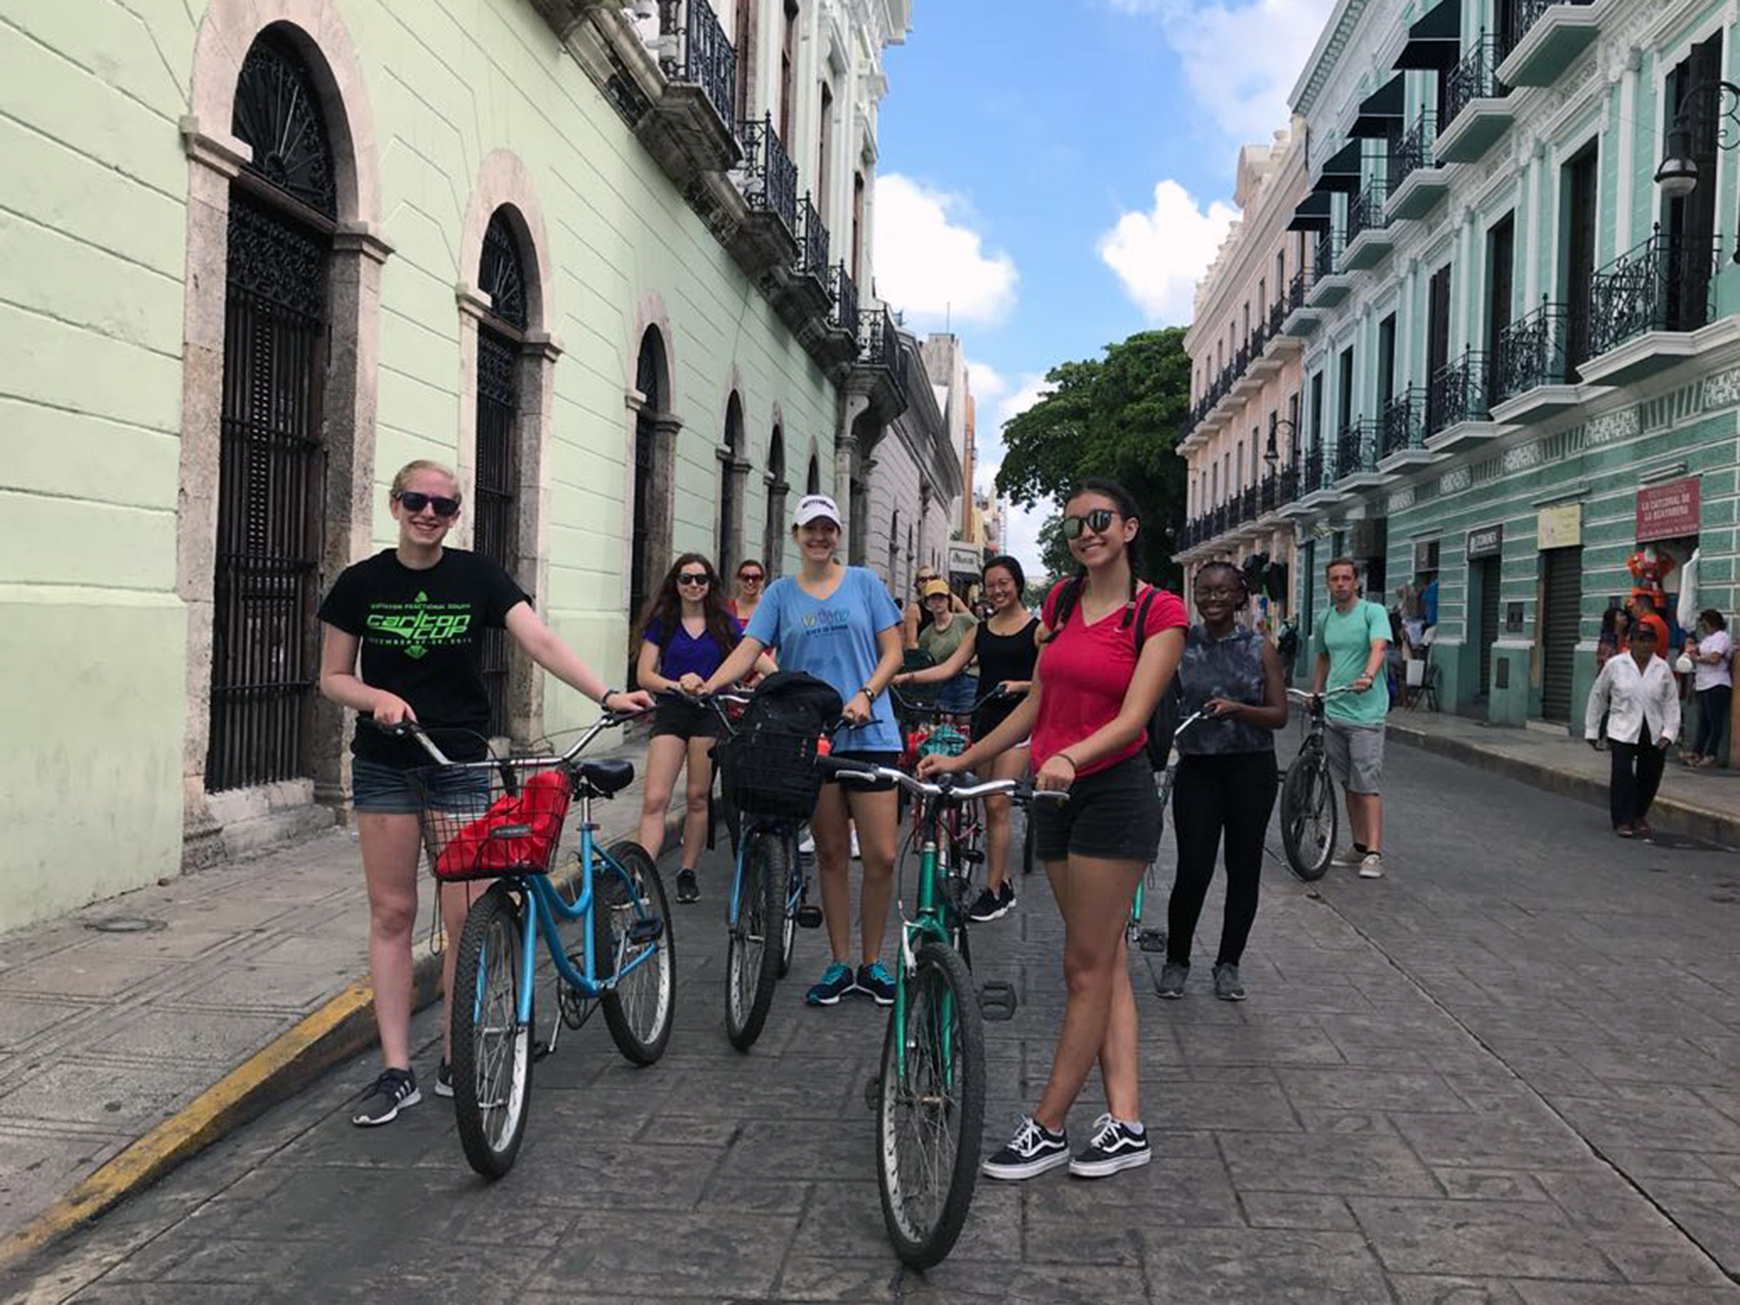 Study abroad in Mexico with IFSA